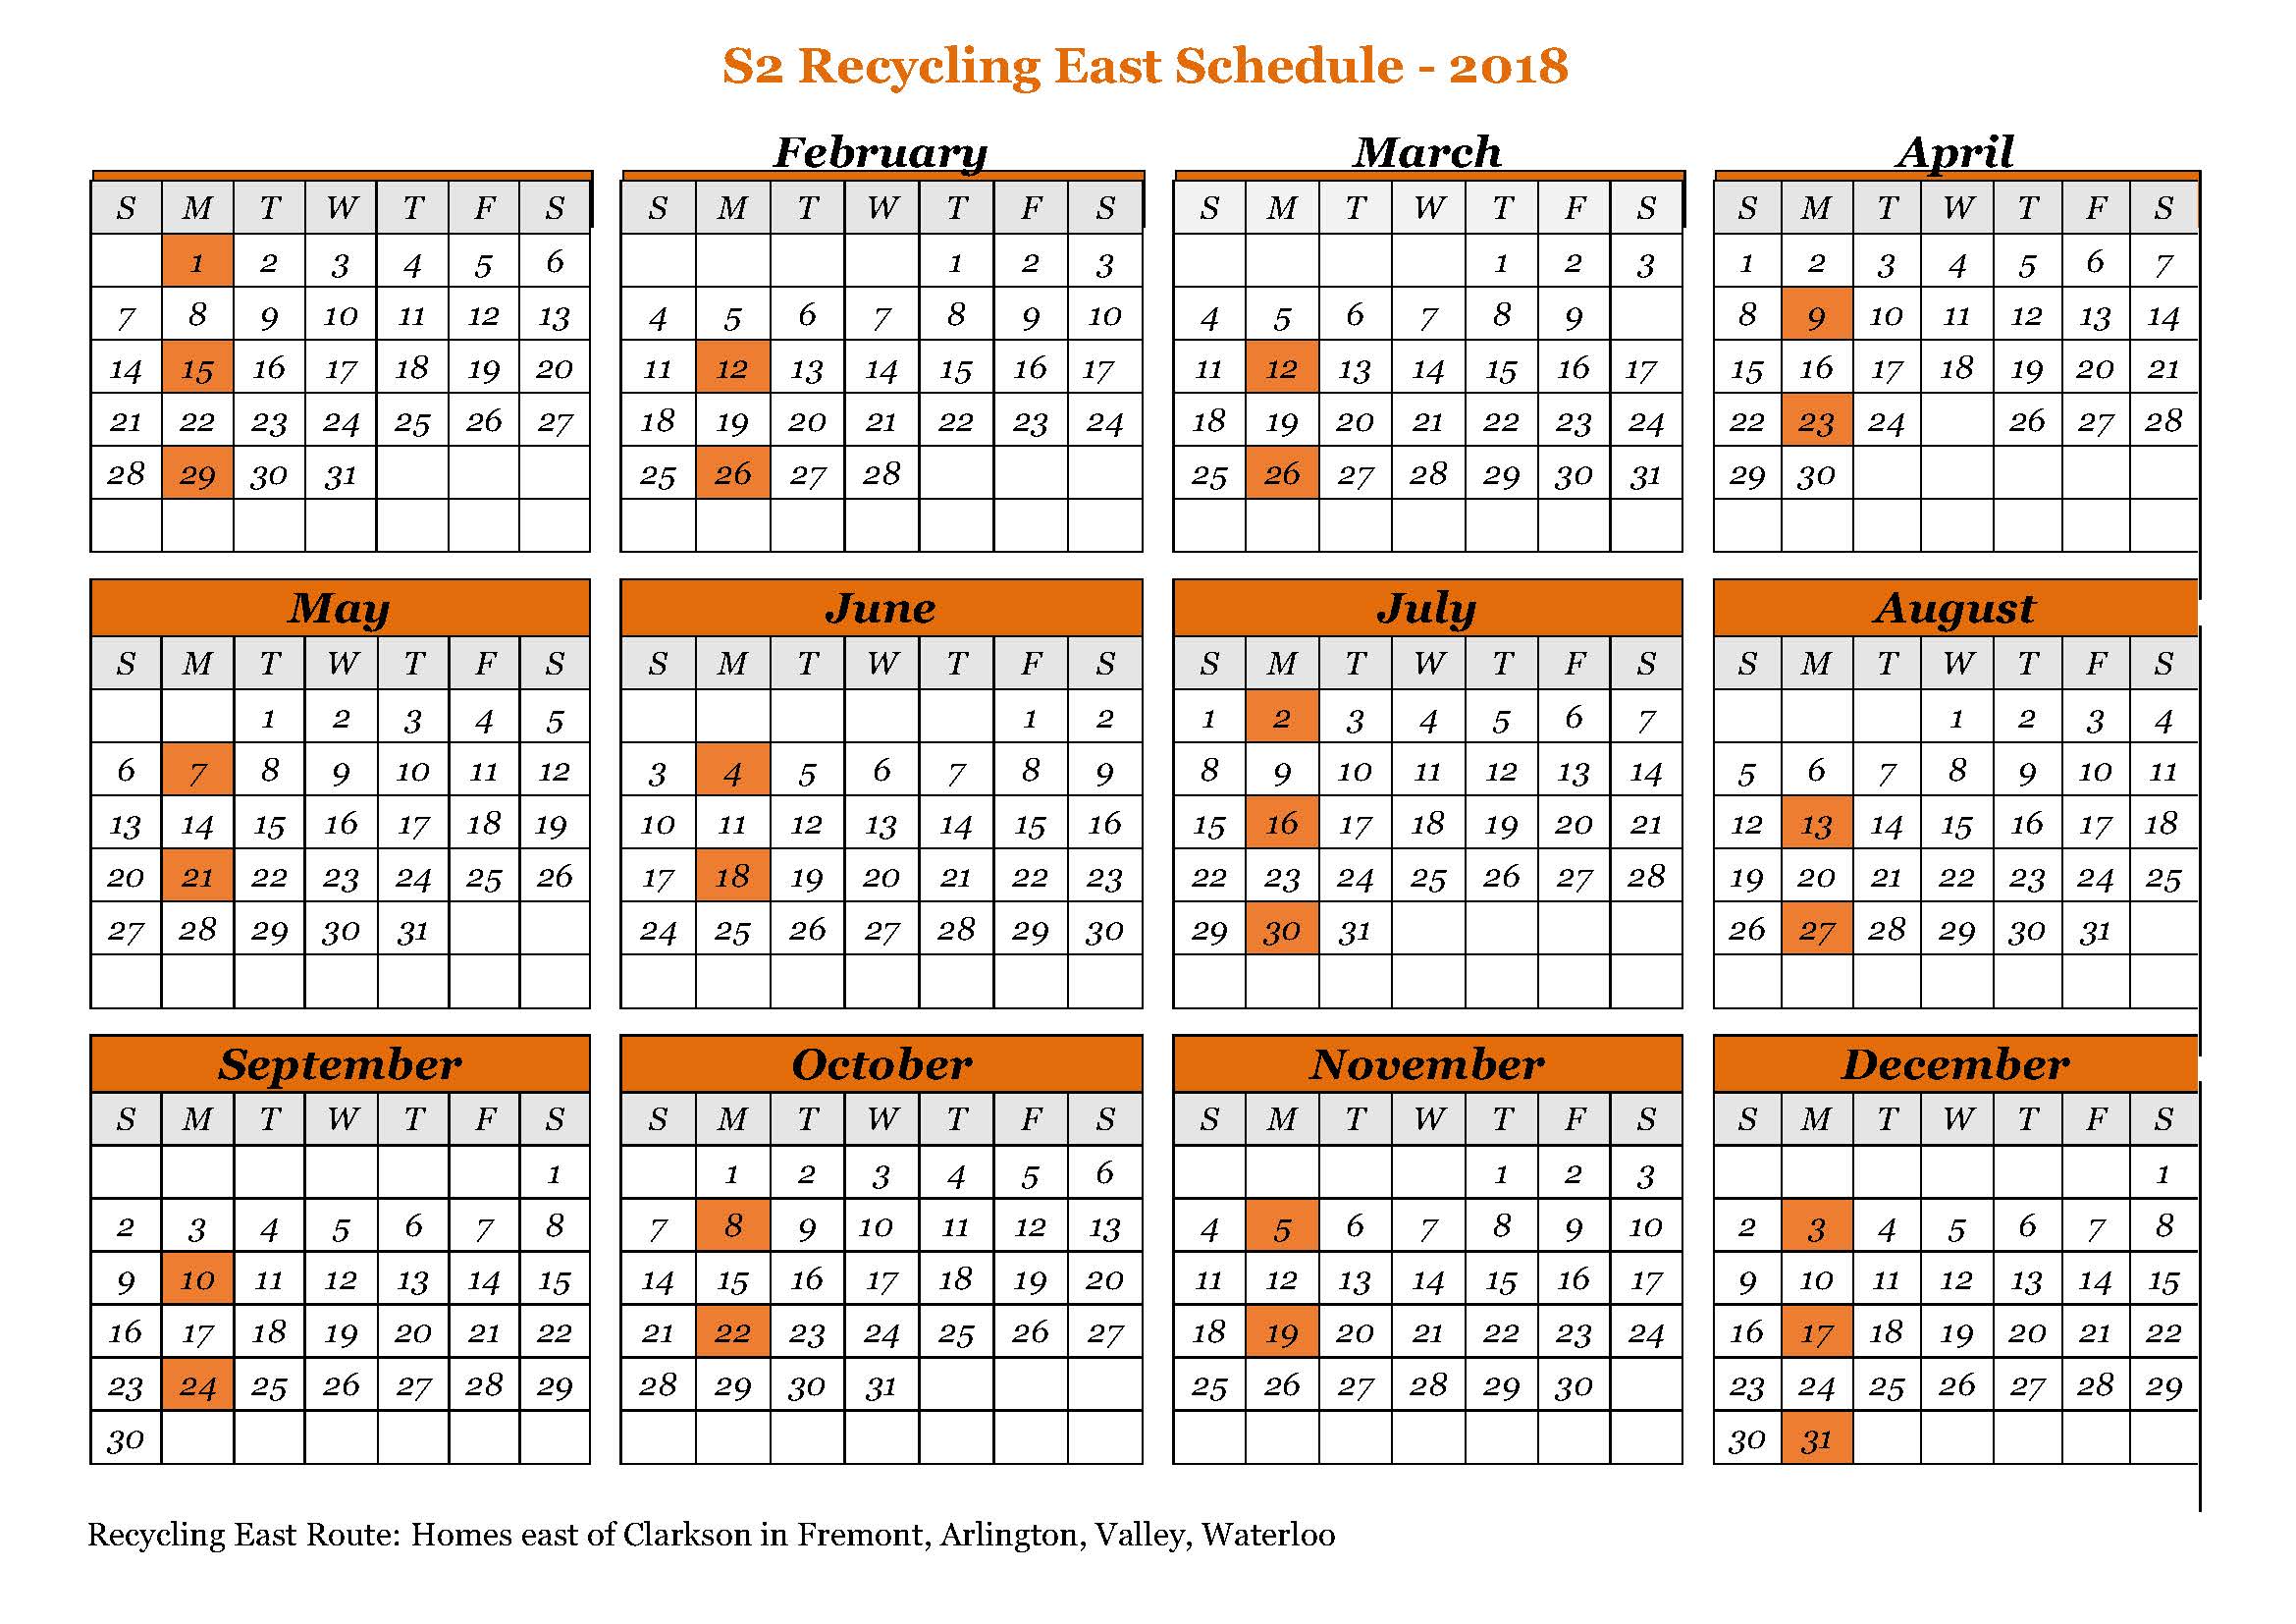 2018 Recycling East Schudulejpg_Page_1